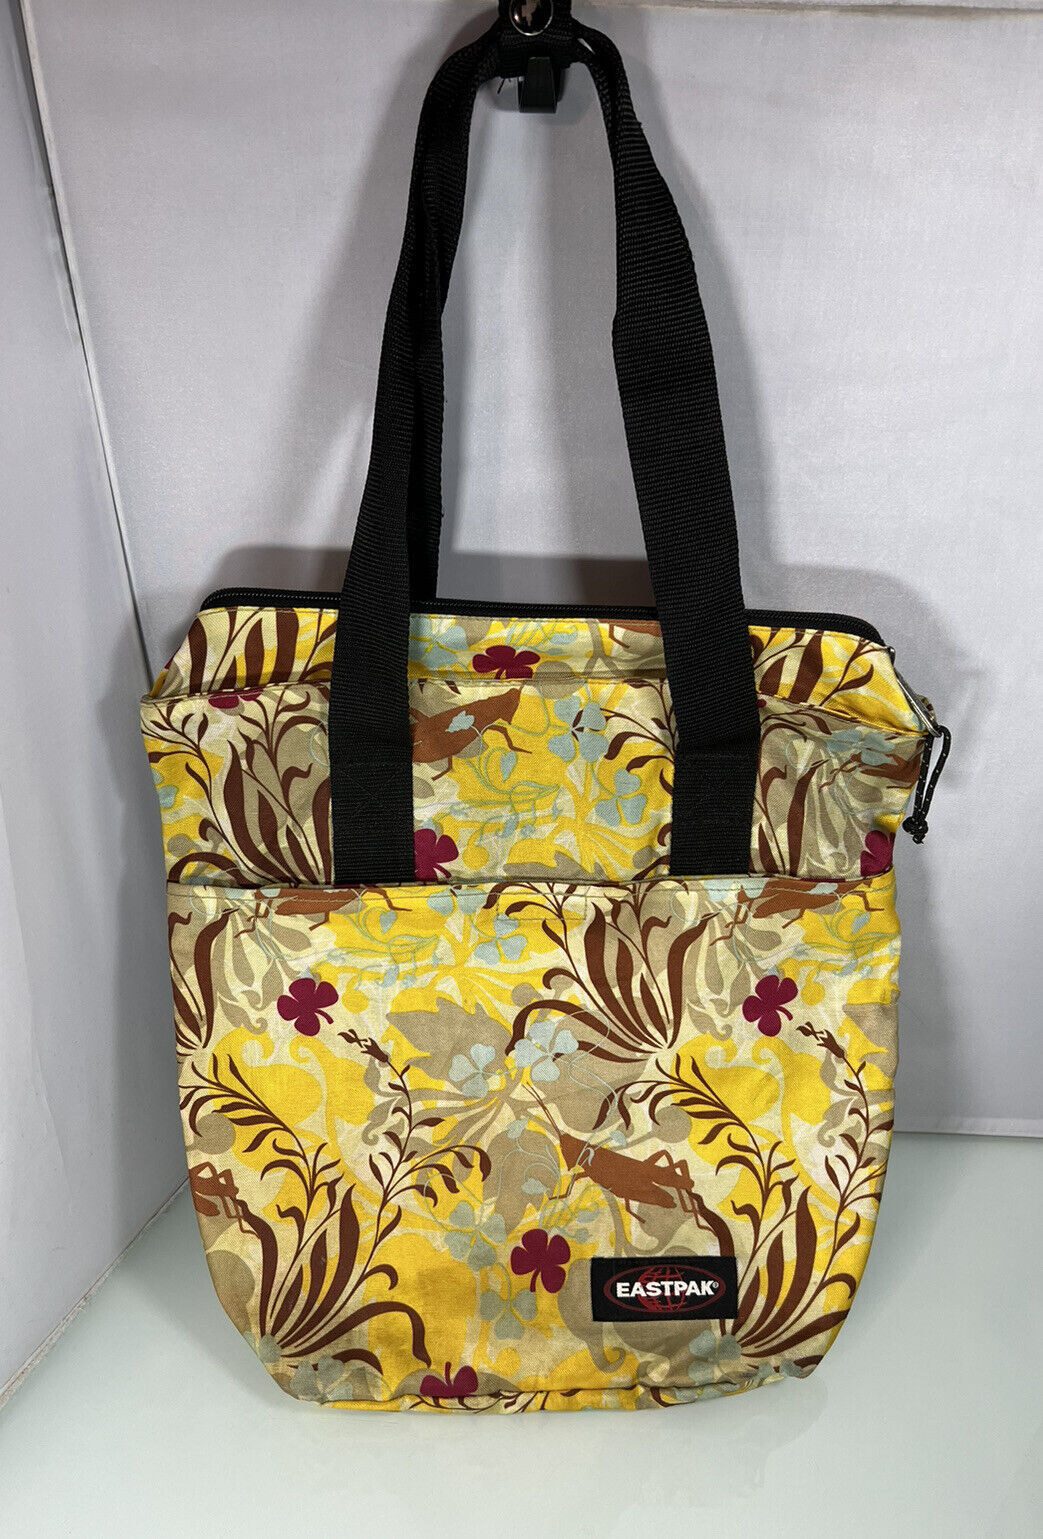 Vintage Yellow Floral Flower Zippered Carry Bag Travel Tote - 14” x 17” |